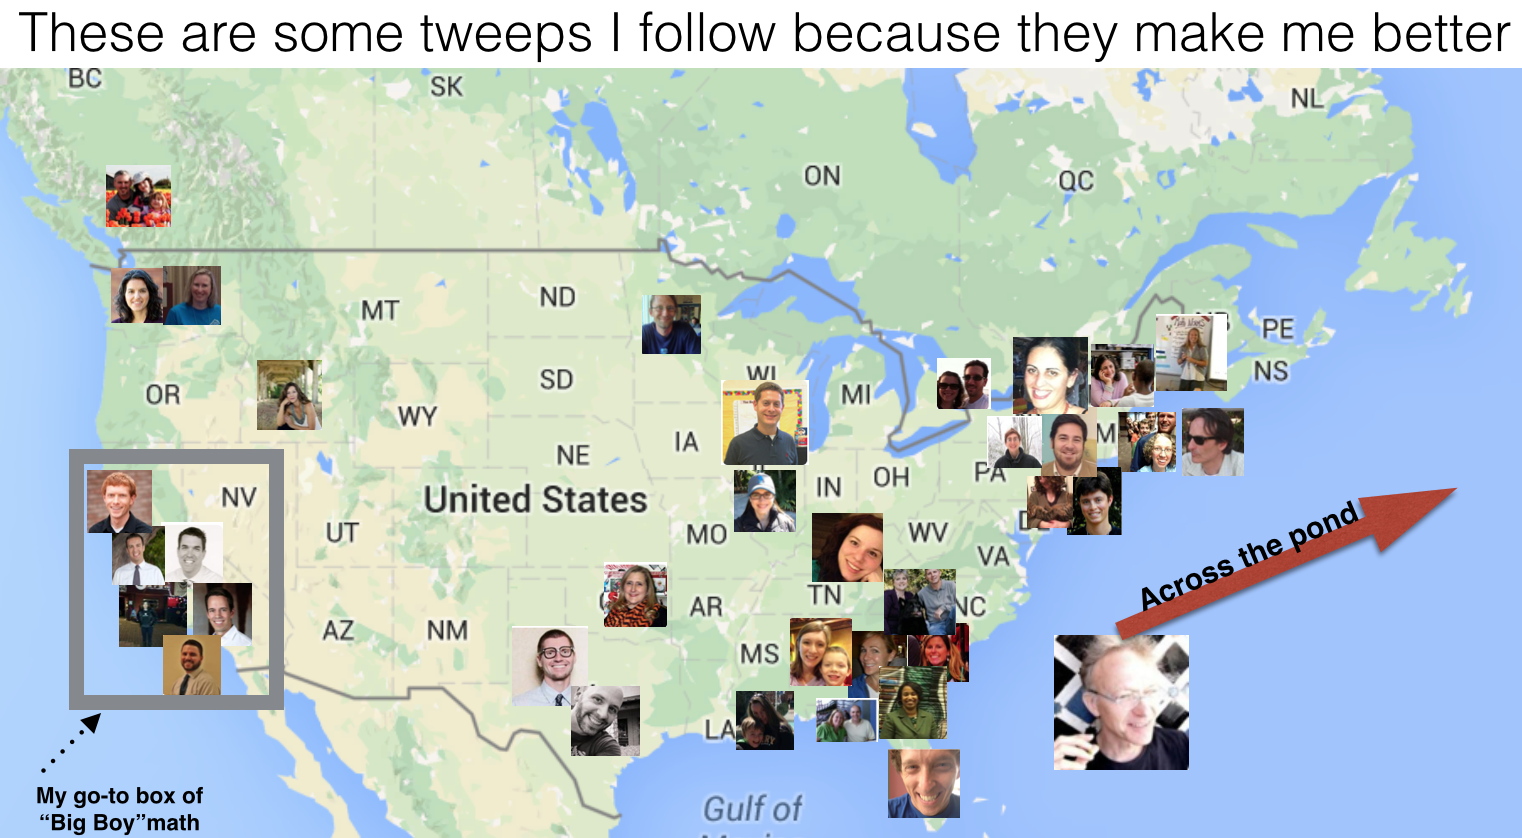 I have many more people to include on this map. It's a work in progress.